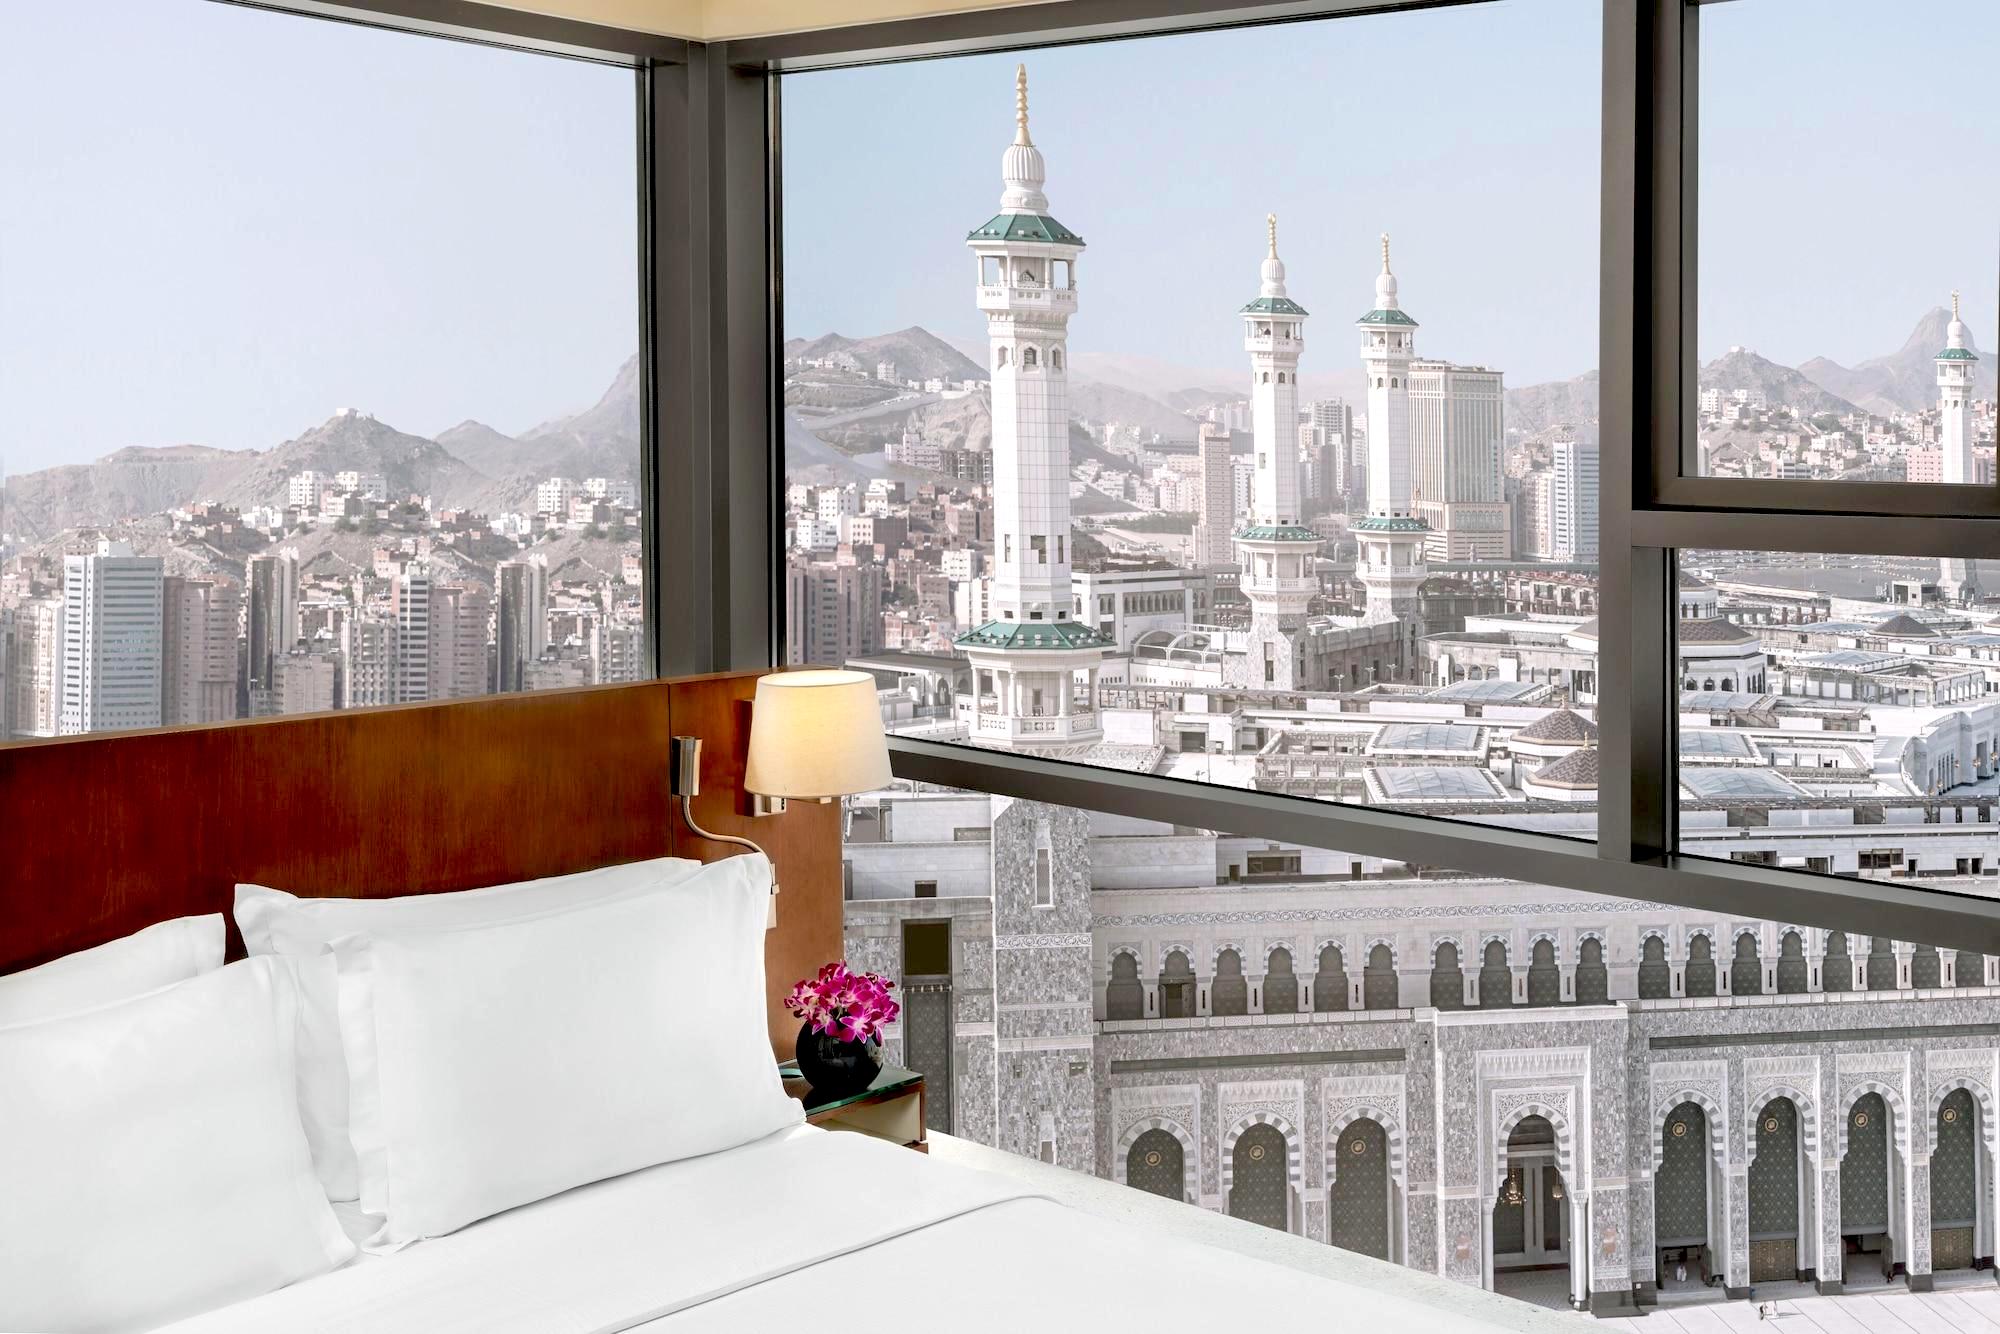 The 6 best hotels in Makkah for an elevated stay Near+Far Middle East